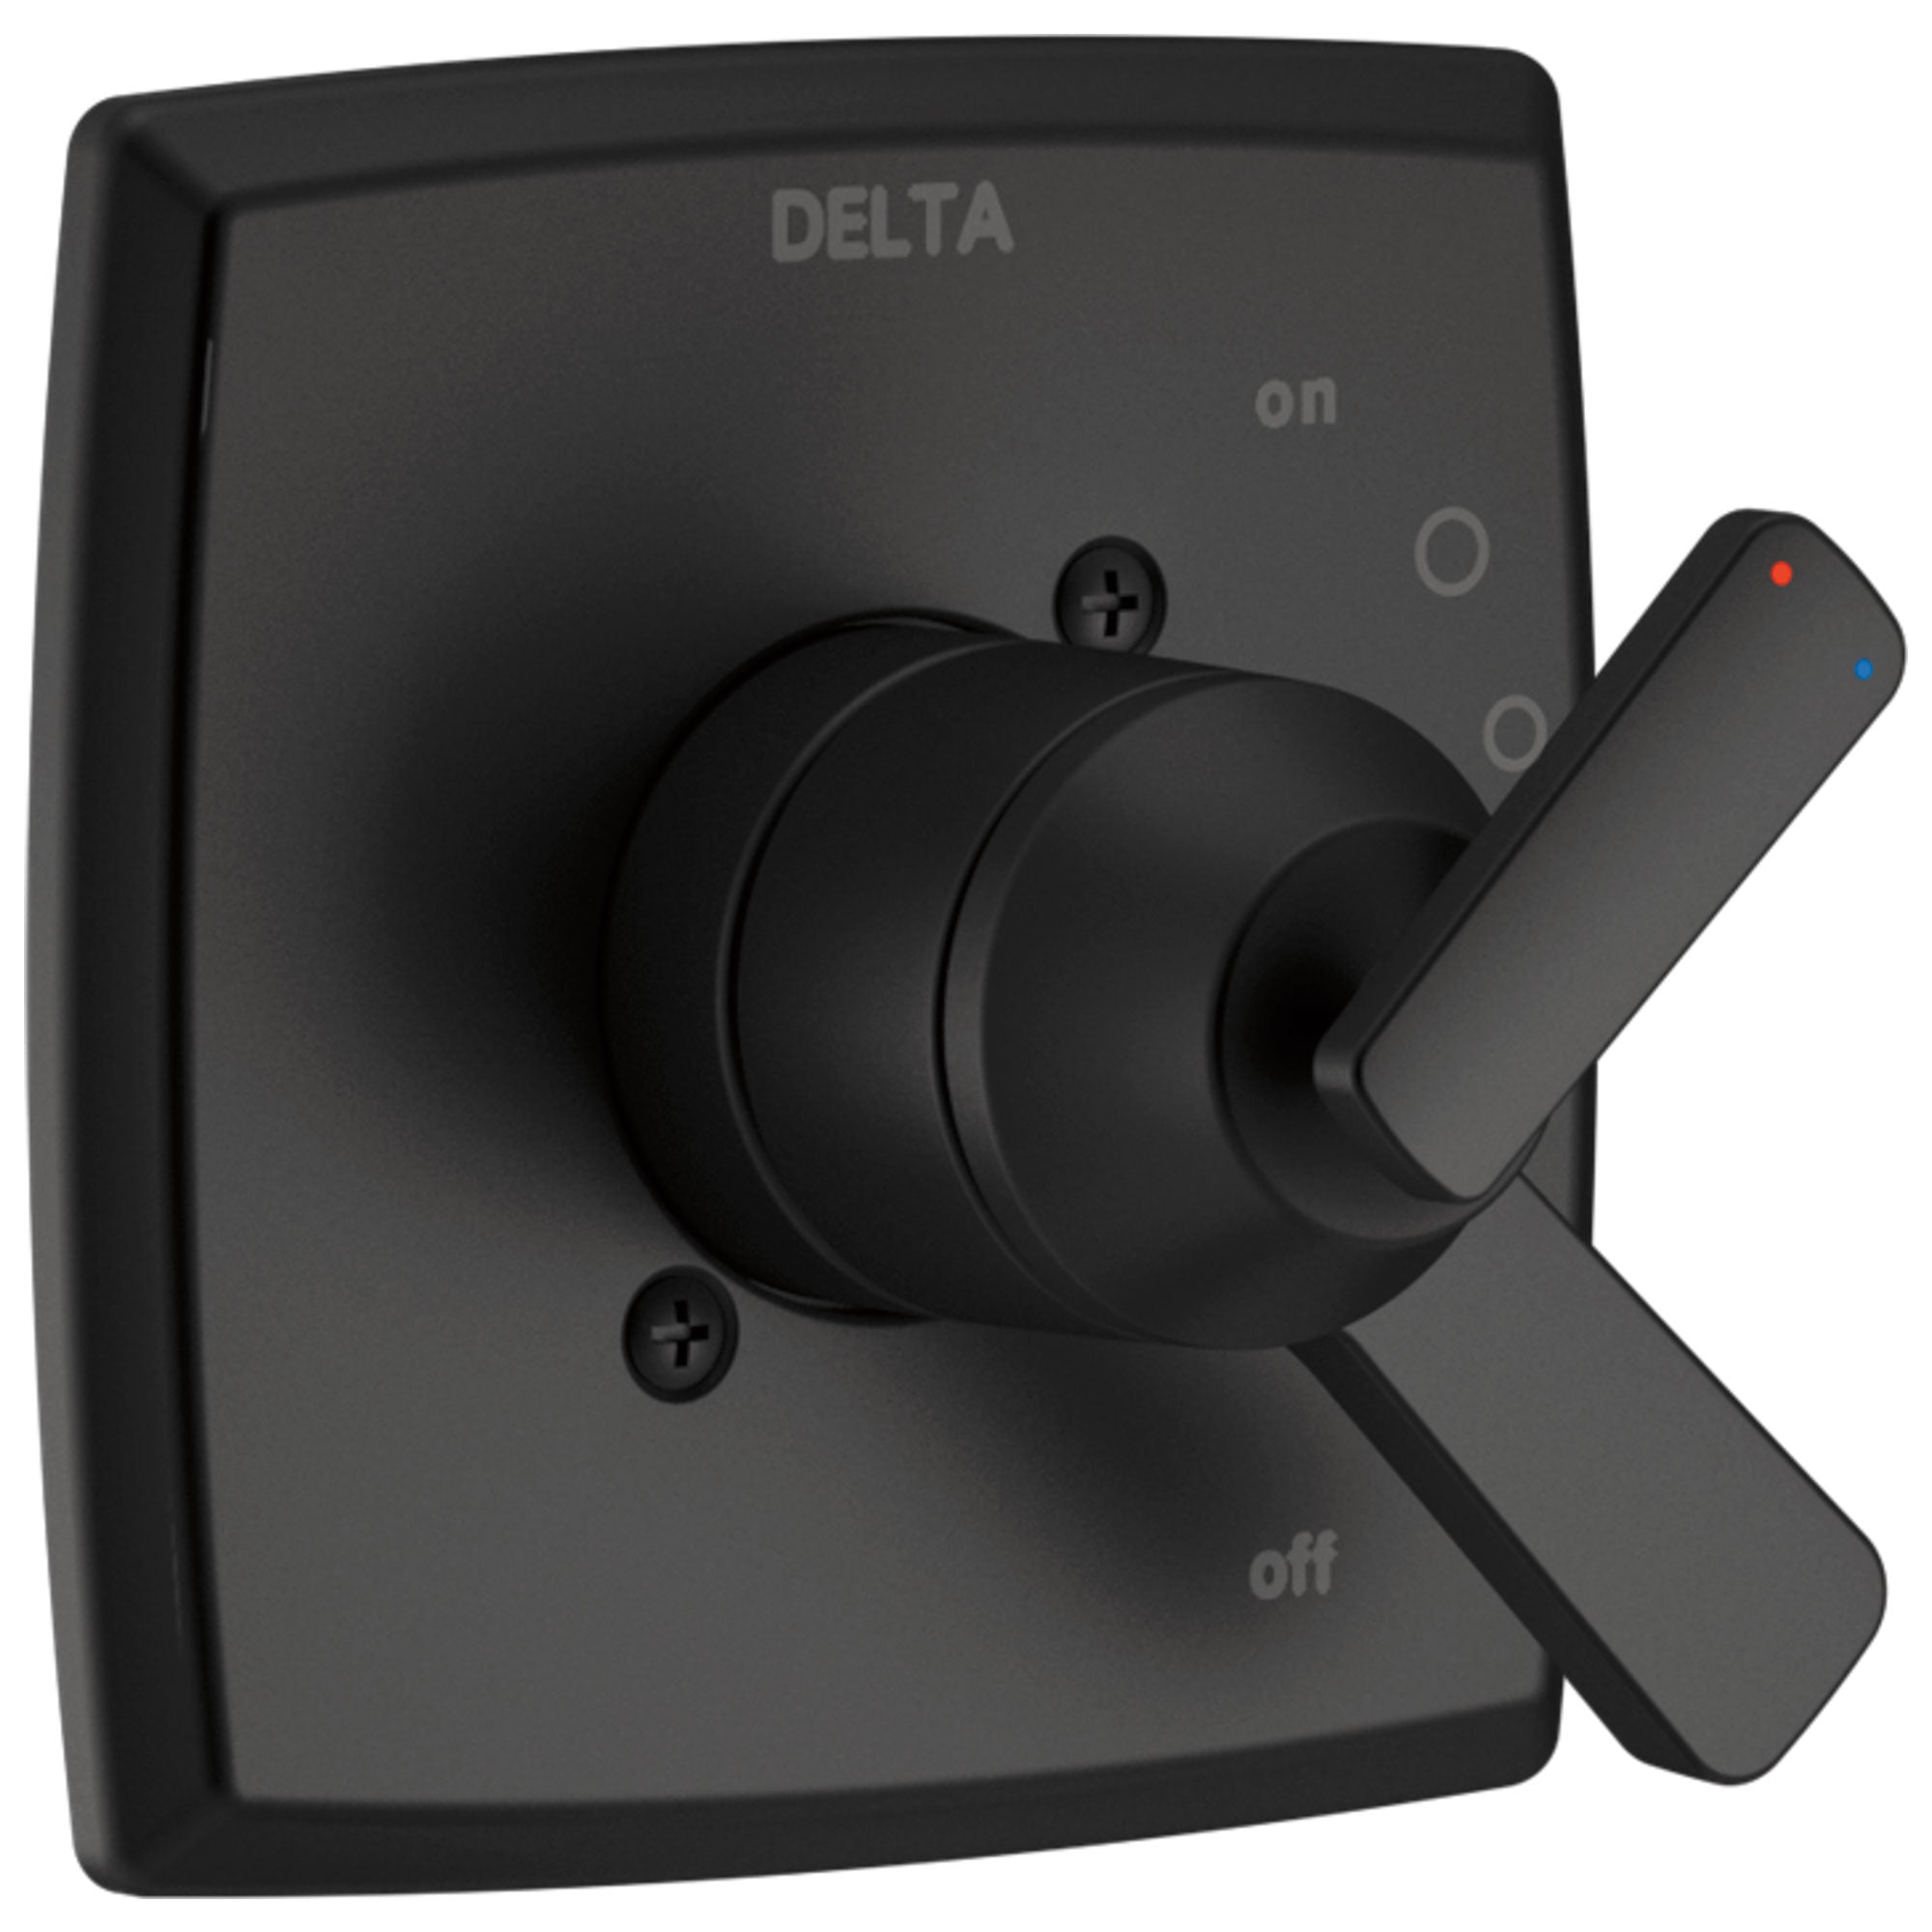 Delta Ashlyn Matte Black Finish Monitor 17 Series Shower Faucet Control Only Includes Handles, Cartridge, and Valve without Stops D3411V